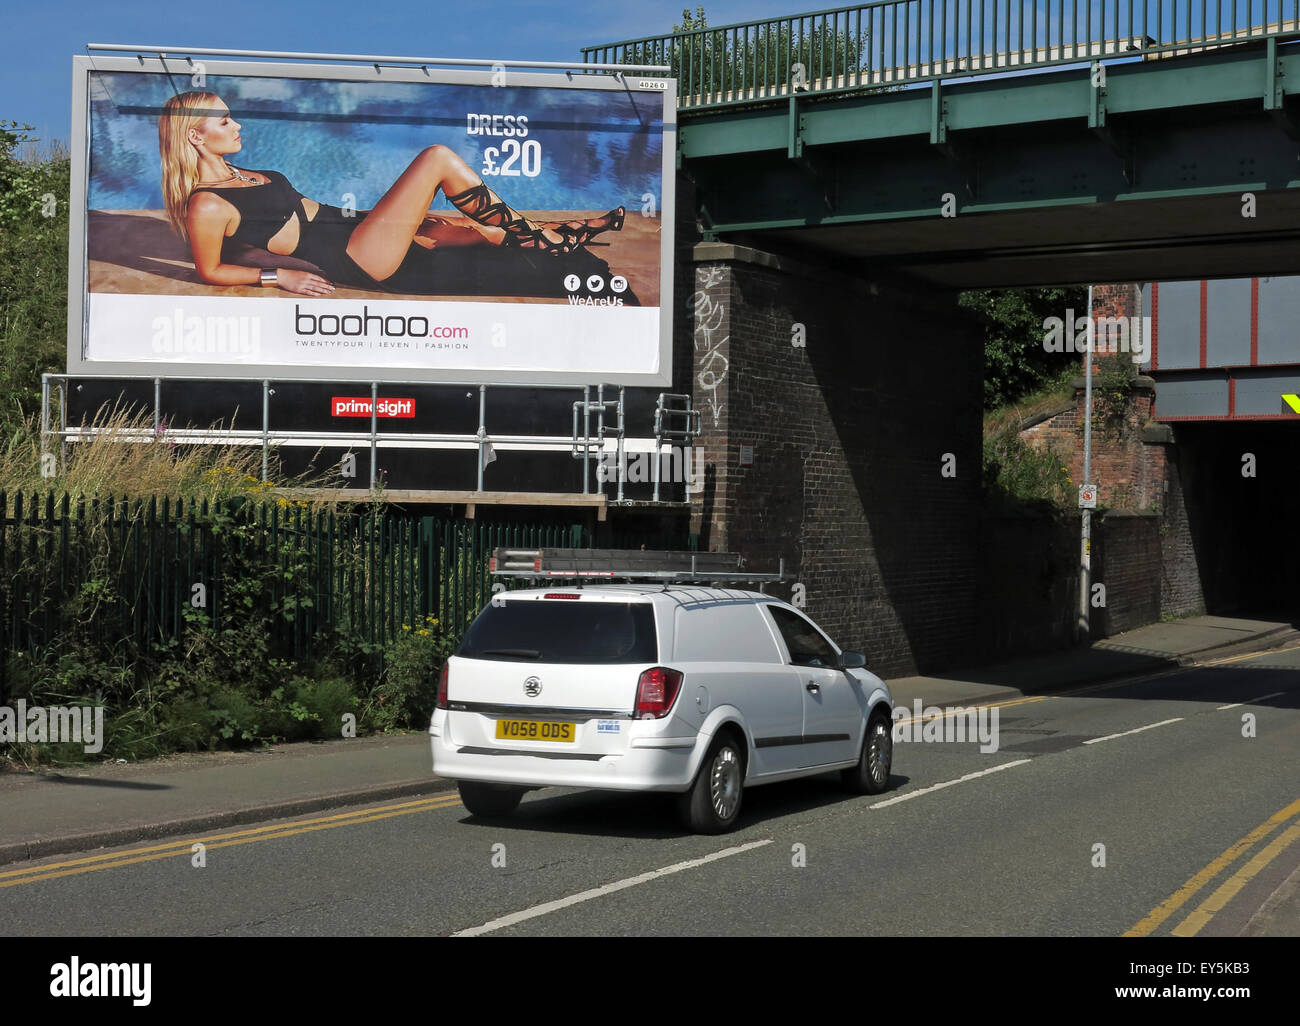 Woman on poster distracting drivers on the road, Warrington England, UK - Boohoo online clothing advert Stock Photo